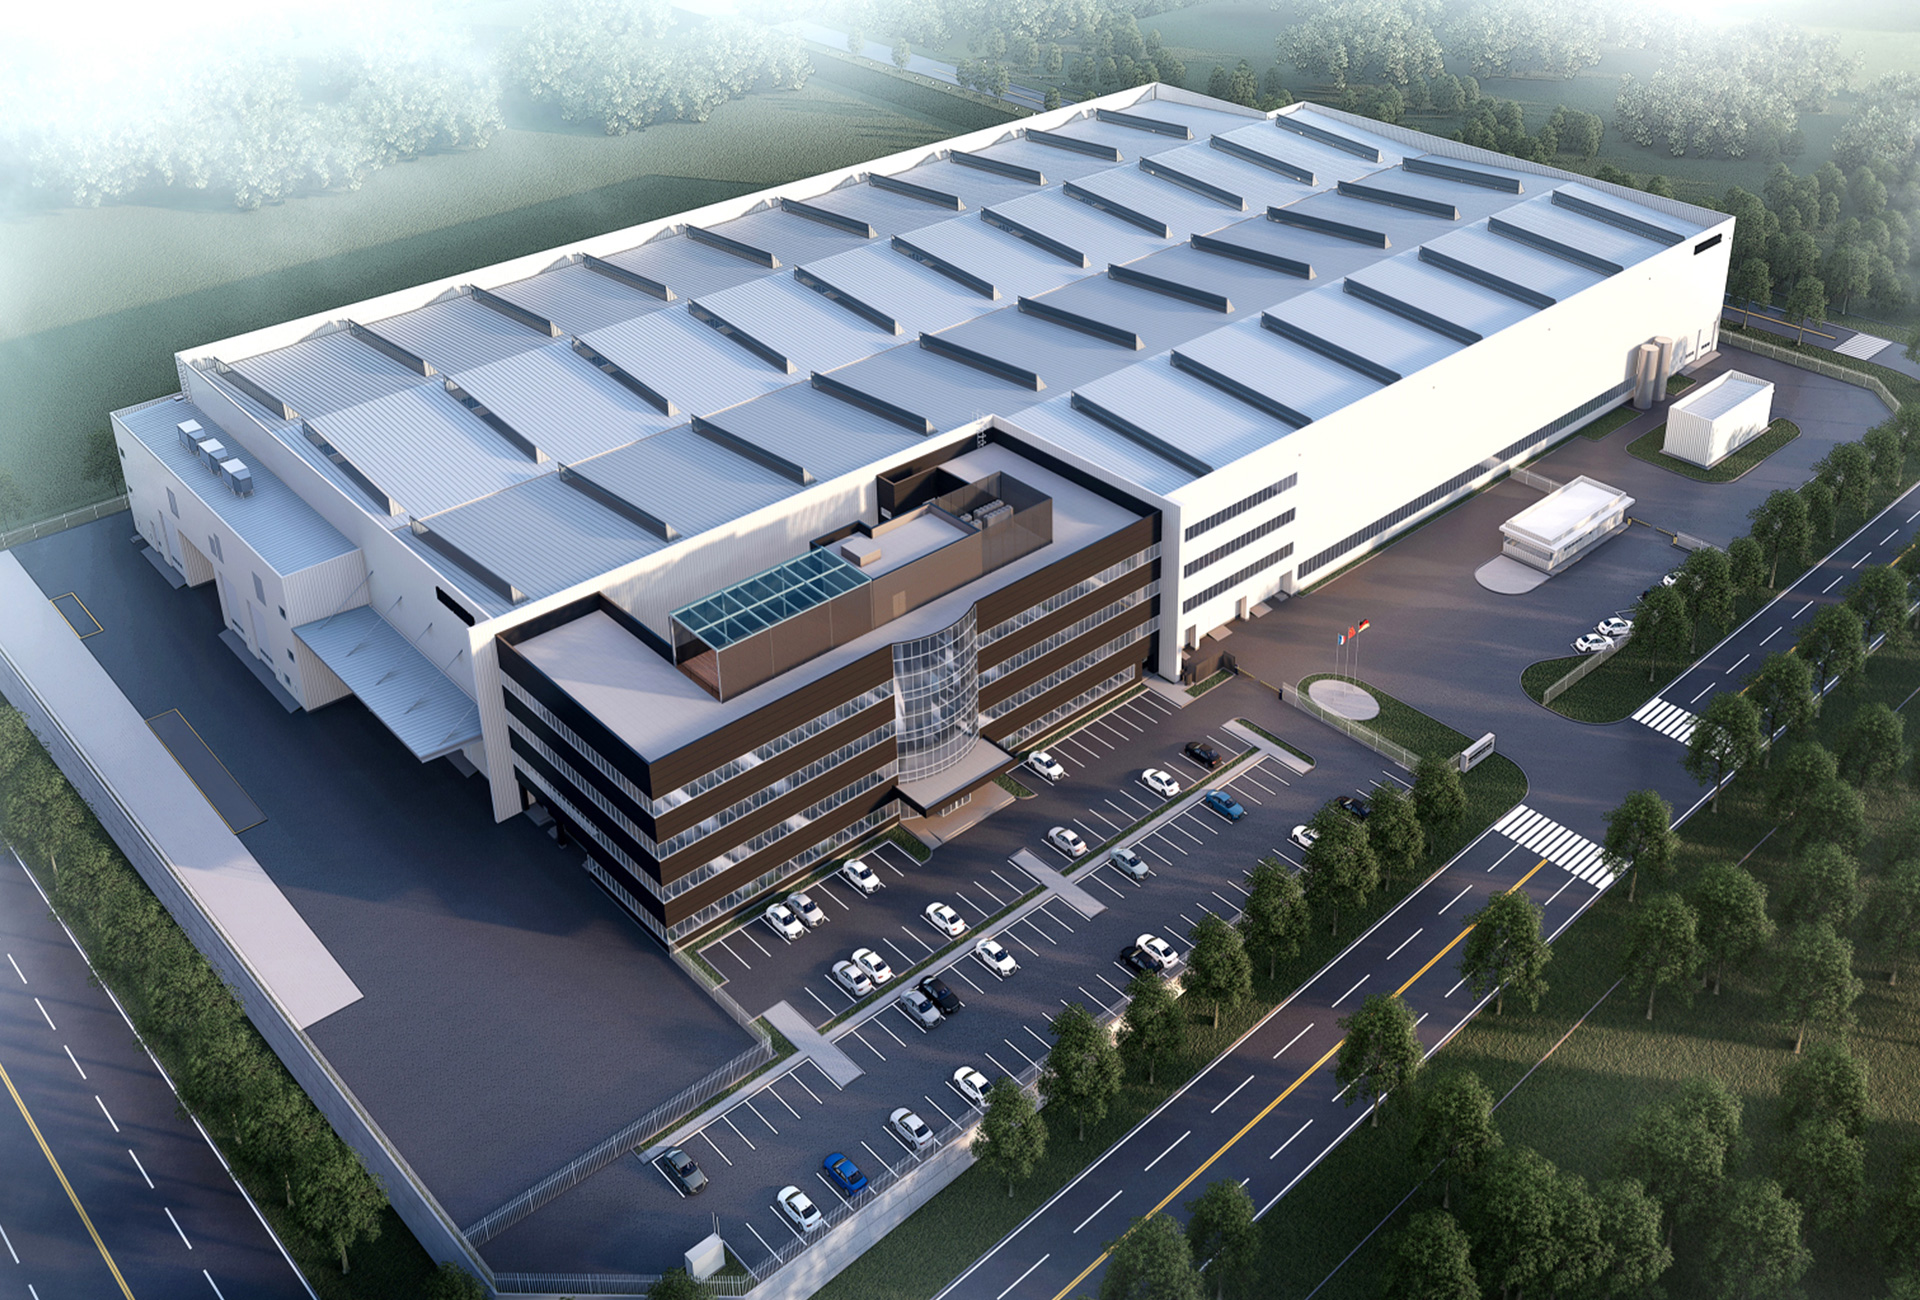 Rendering of the new Liebherr production site in dalian (china)